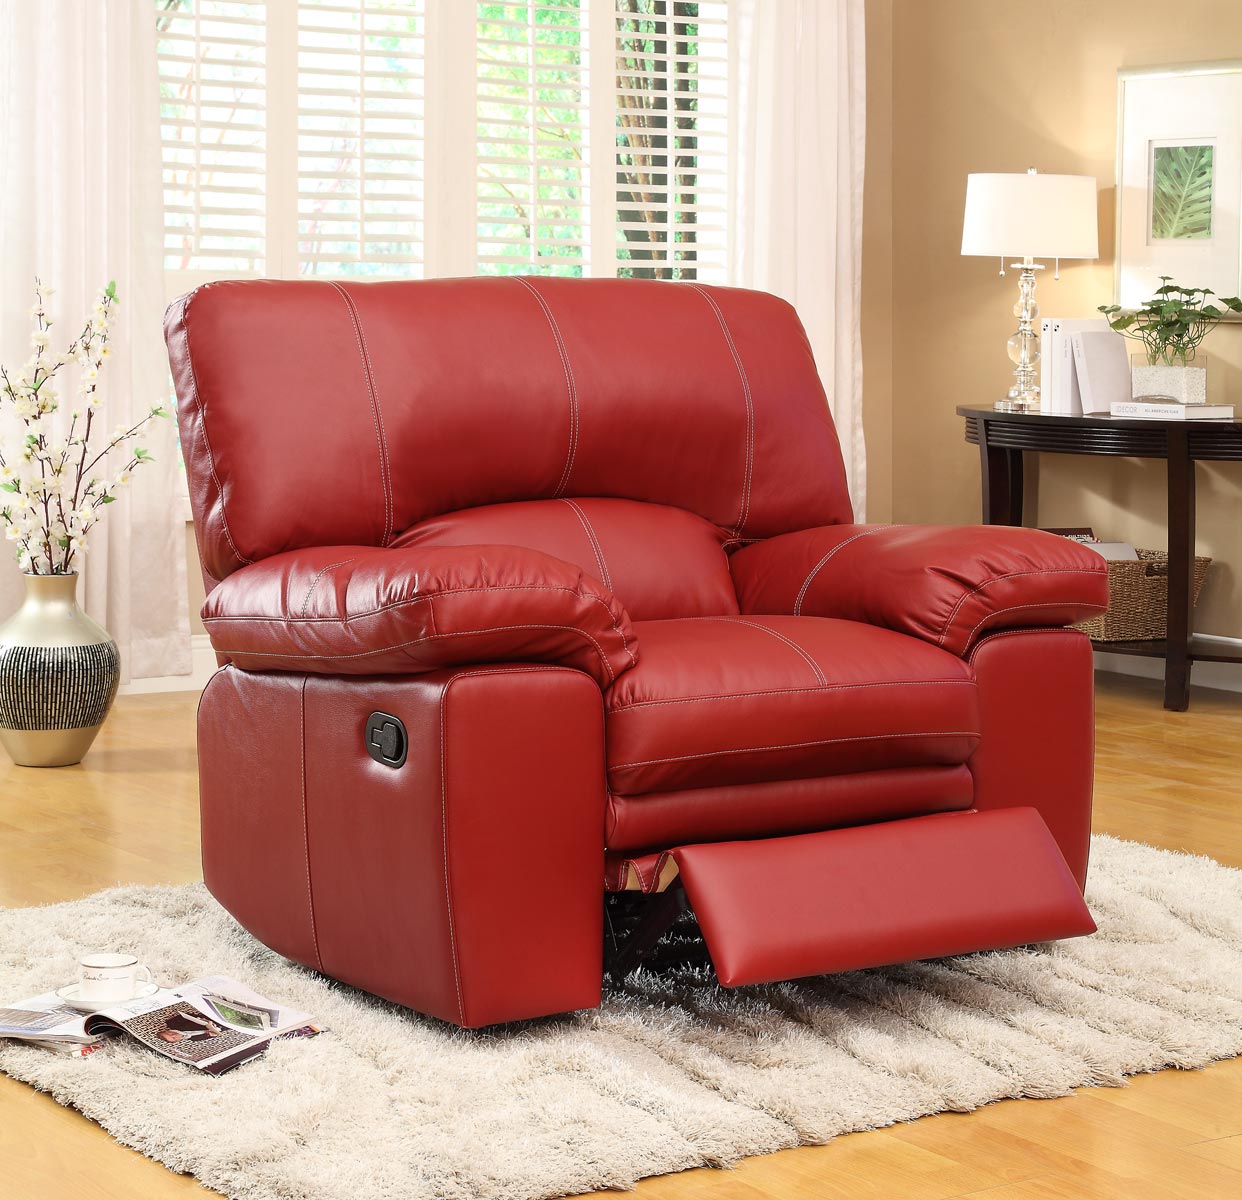 Homelegance Kendrick Glider Recliner Chair - Red - Bonded Leather Match